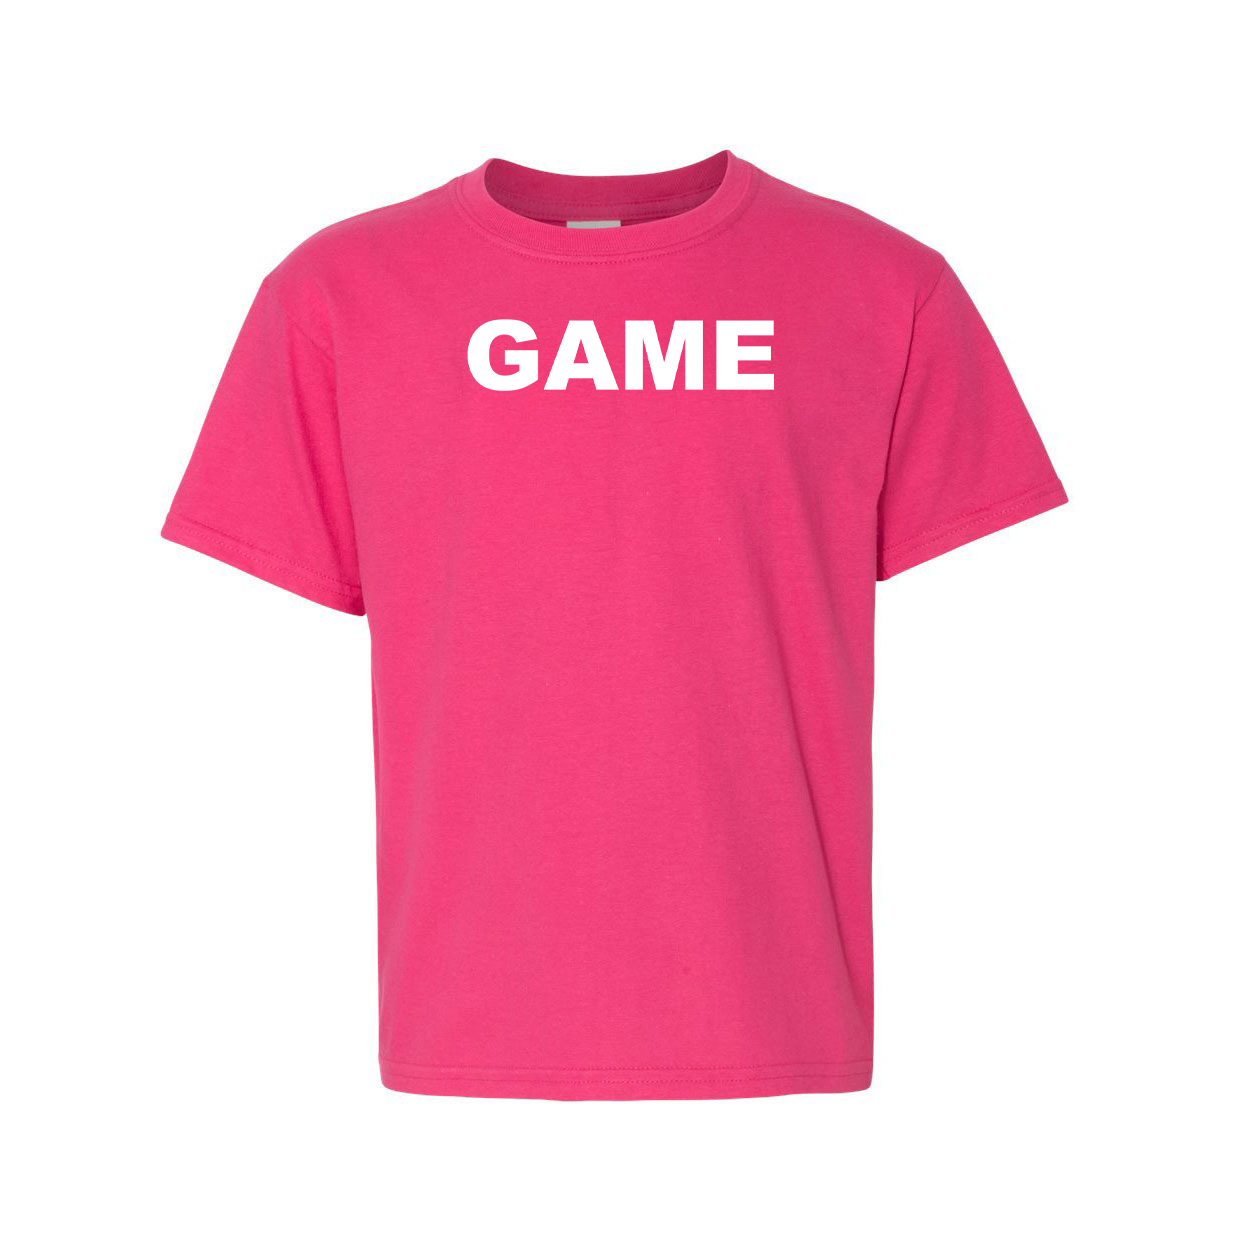 Game Brand Logo Classic Youth T-Shirt Pink 